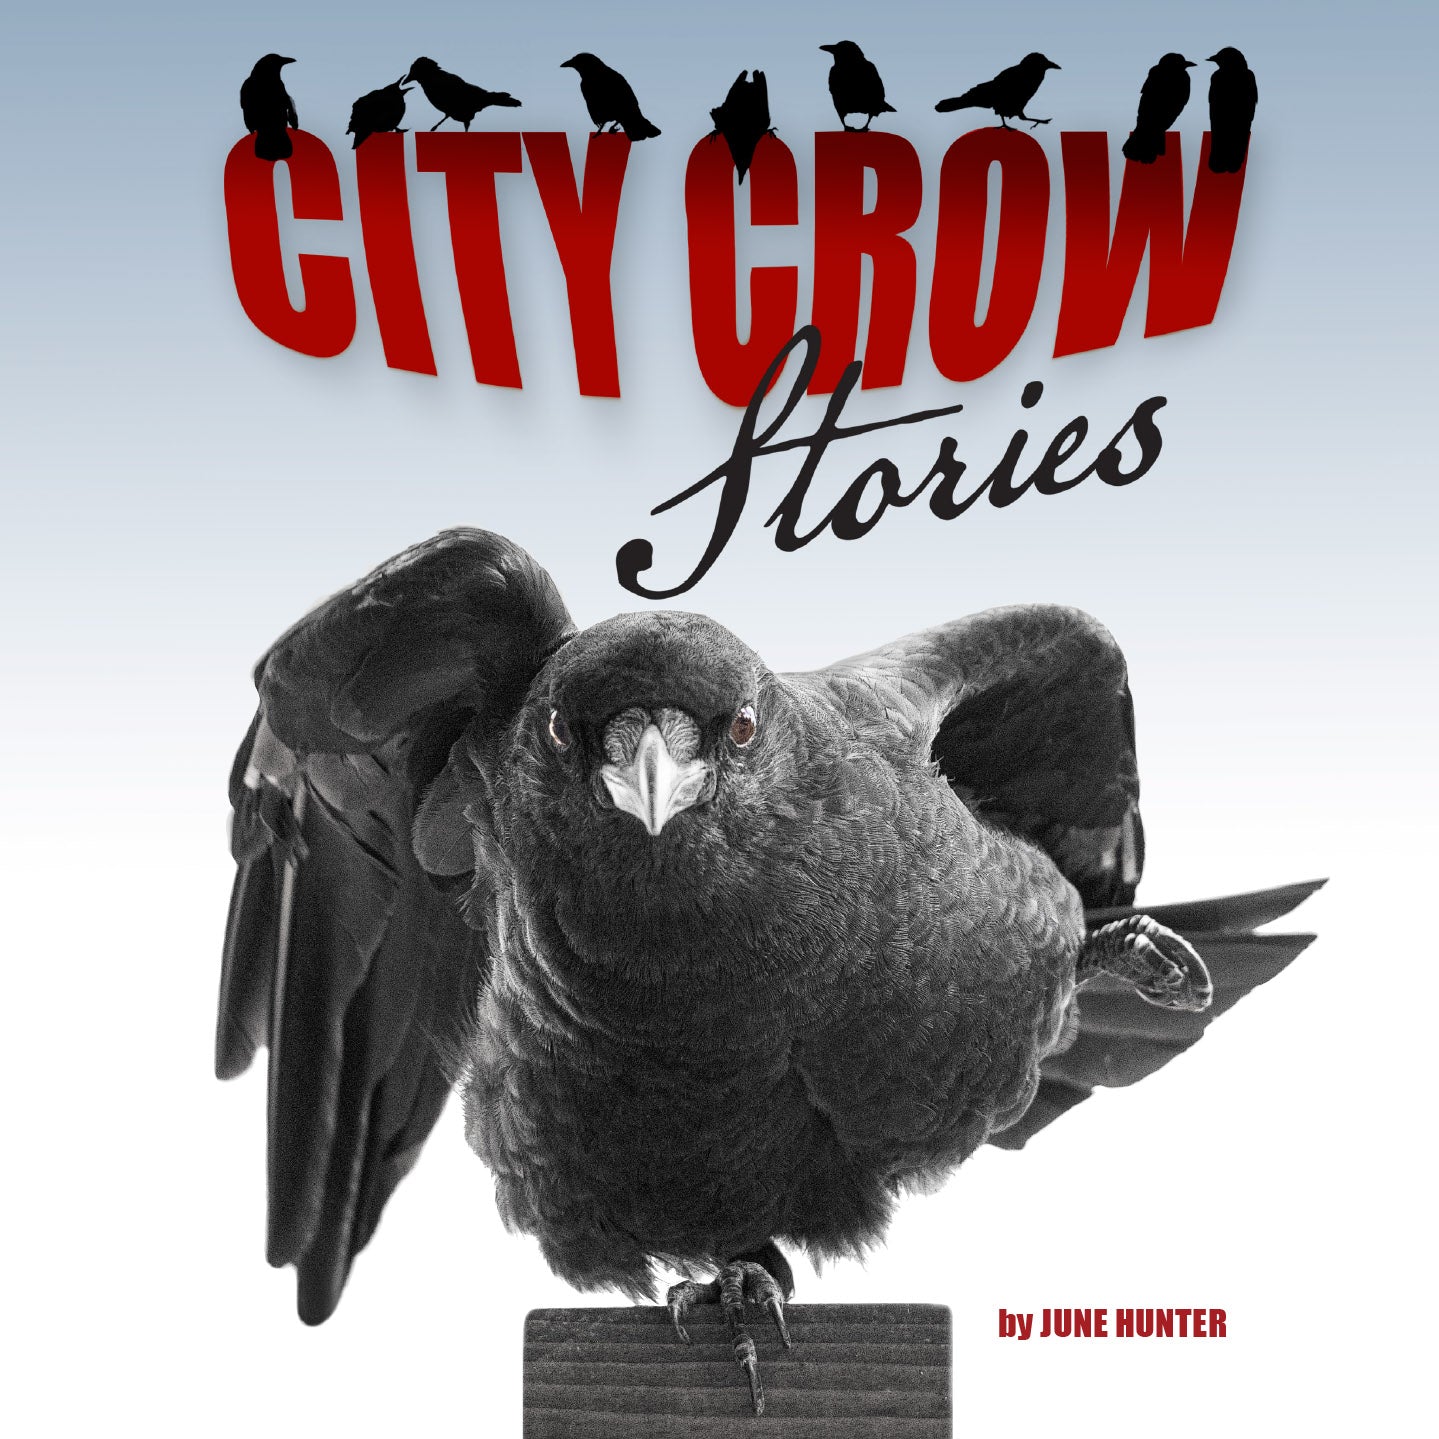 Book on Crows - City Crow Stories by June Hunter